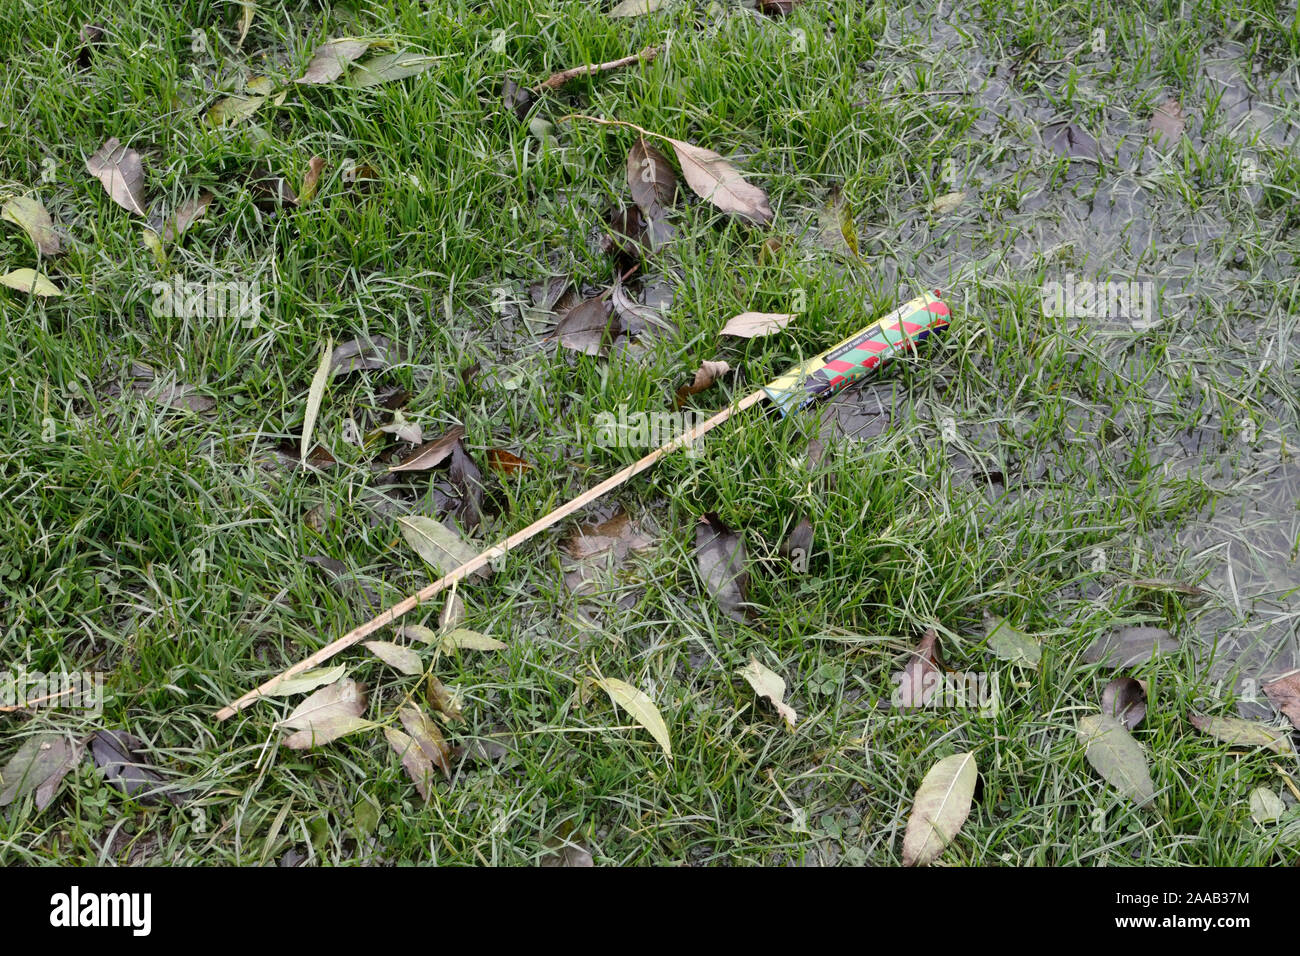 Discarded firework rocket on the ground,  damp playing field Stock Photo